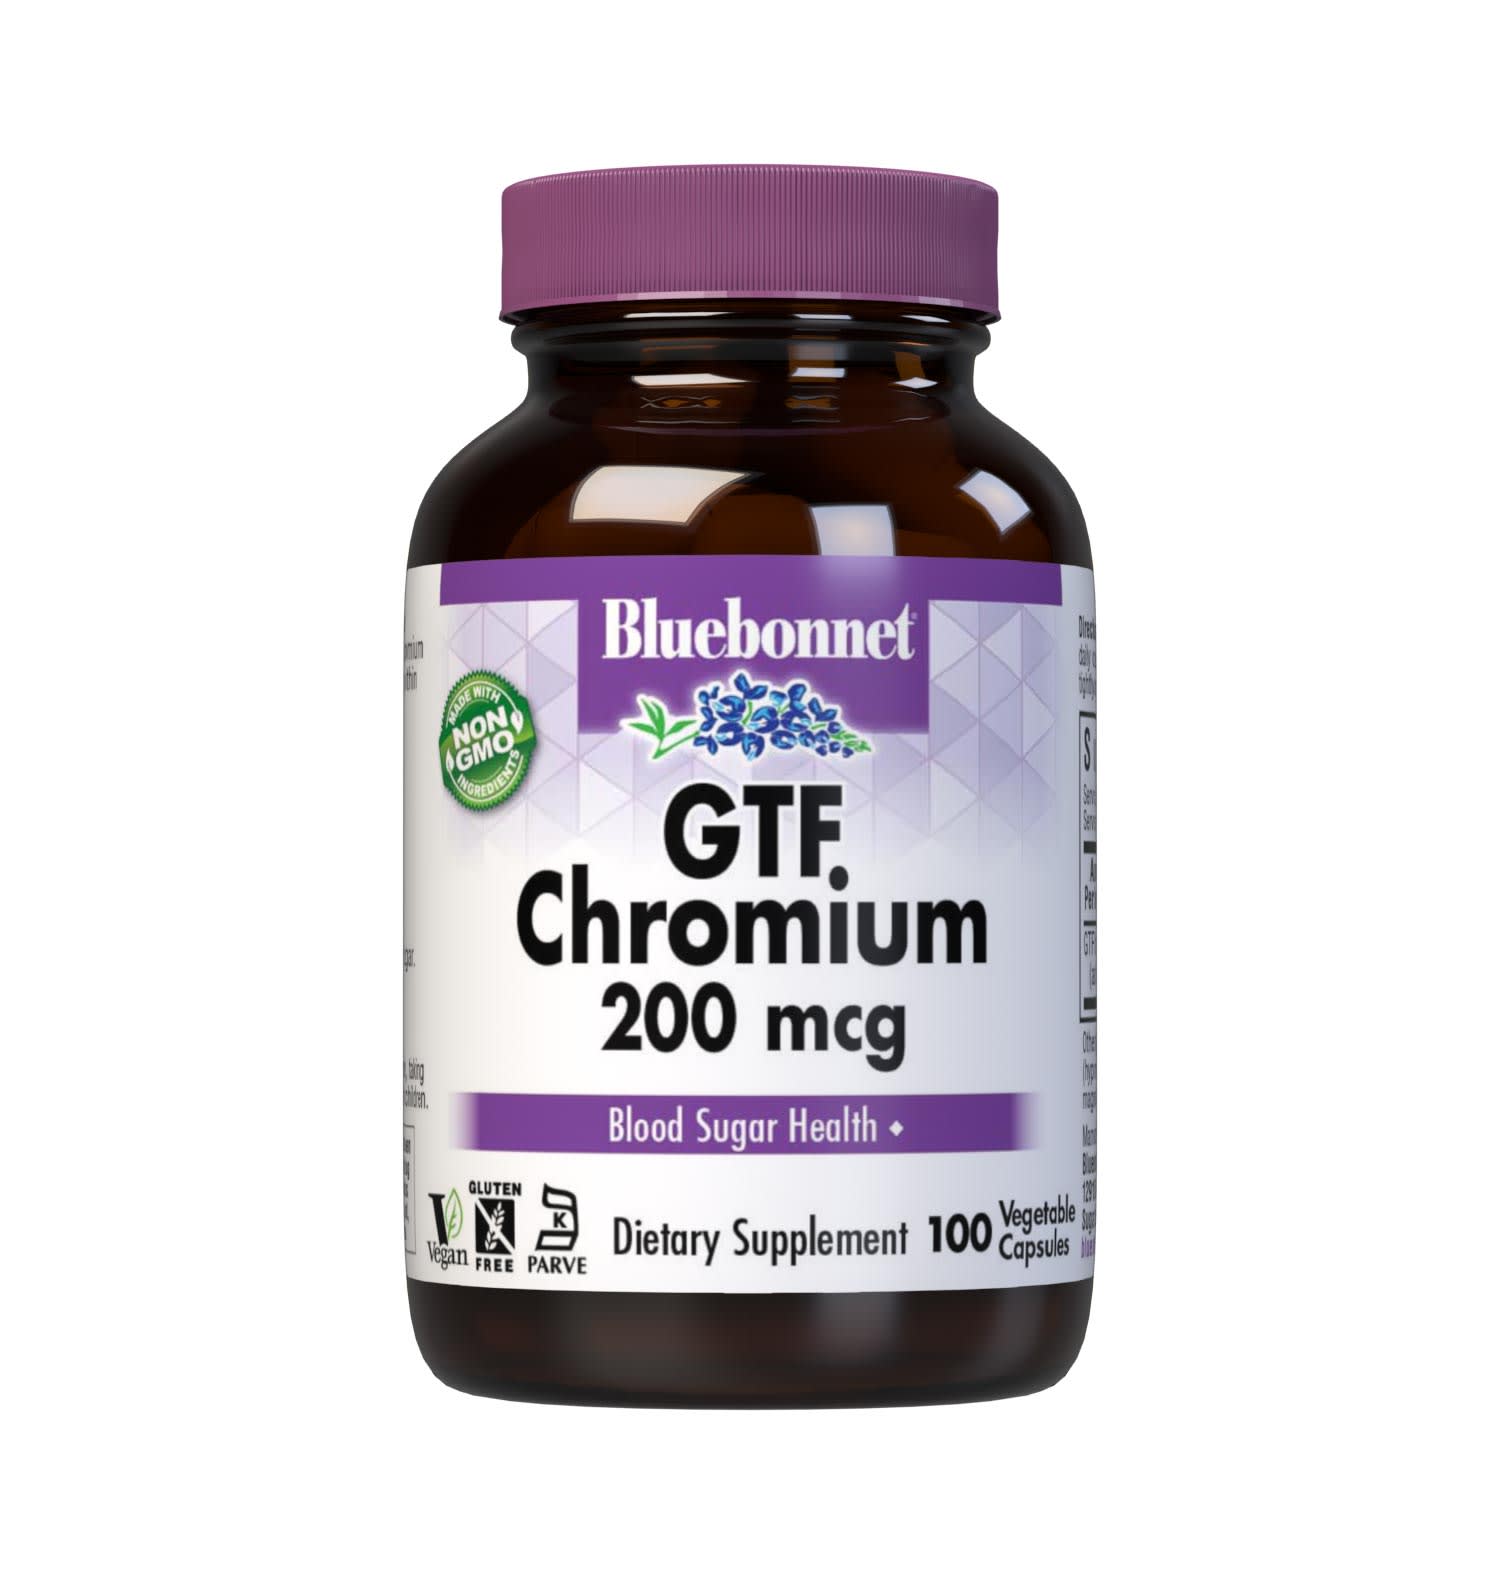 Bluebonnet's GTF Chromium 200 mcg 100 Vegetable Capsules are formulated with GTF, a yeast-source trivalent chromium to help support blood sugar levels that are already within a normal range. #size_100 count